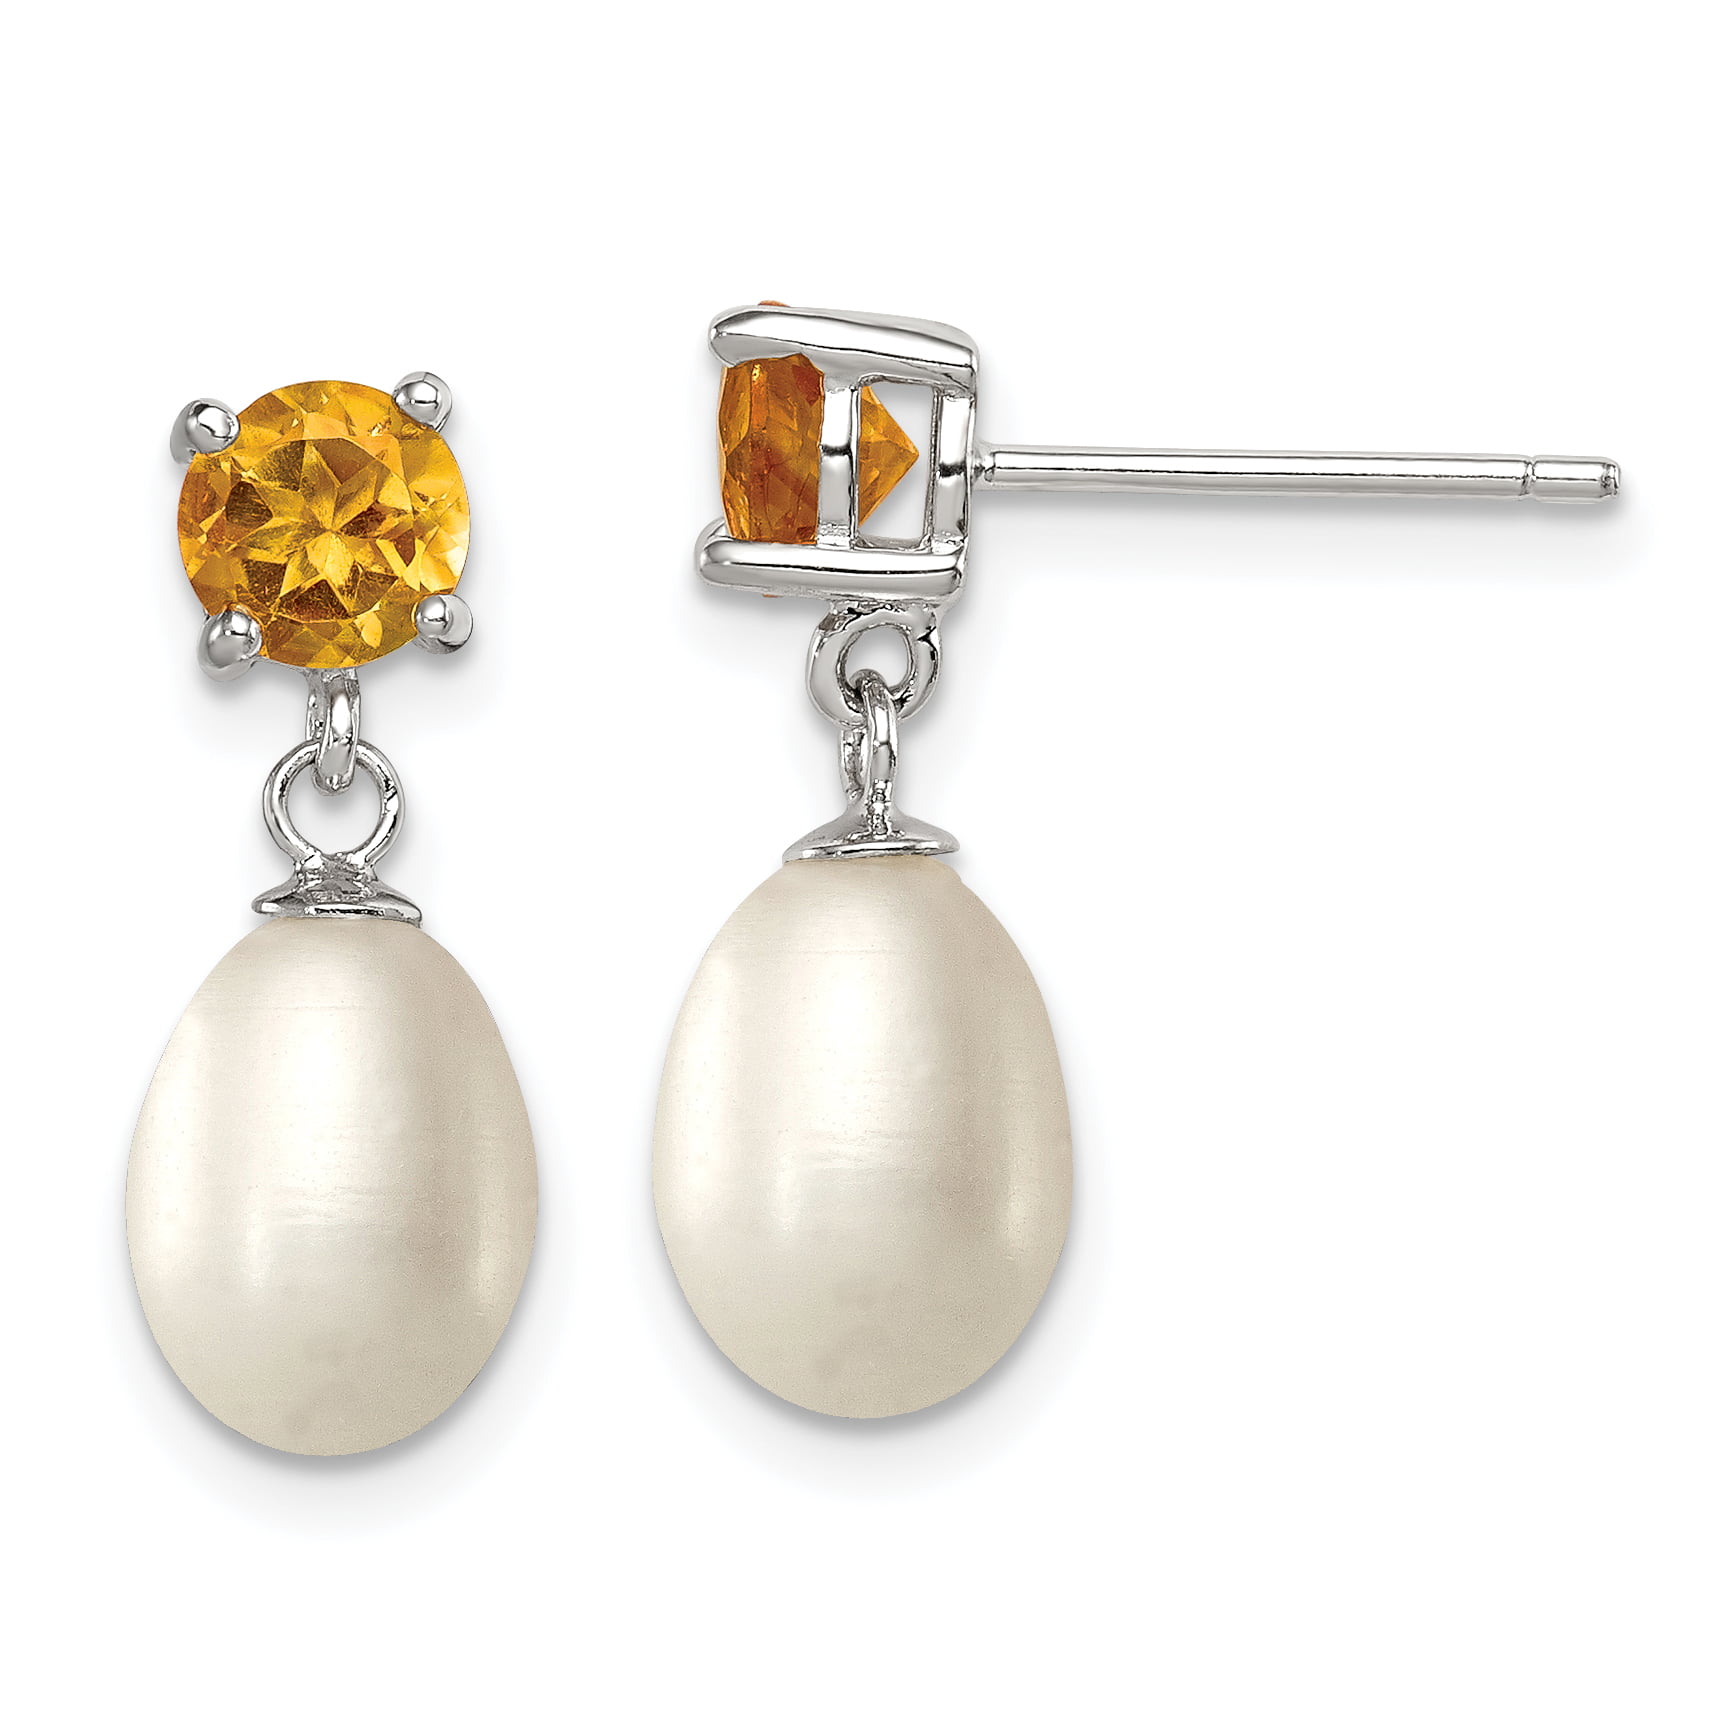 Stud Post Earring Round Simulated Yellow Citrine 925 Sterling Silver